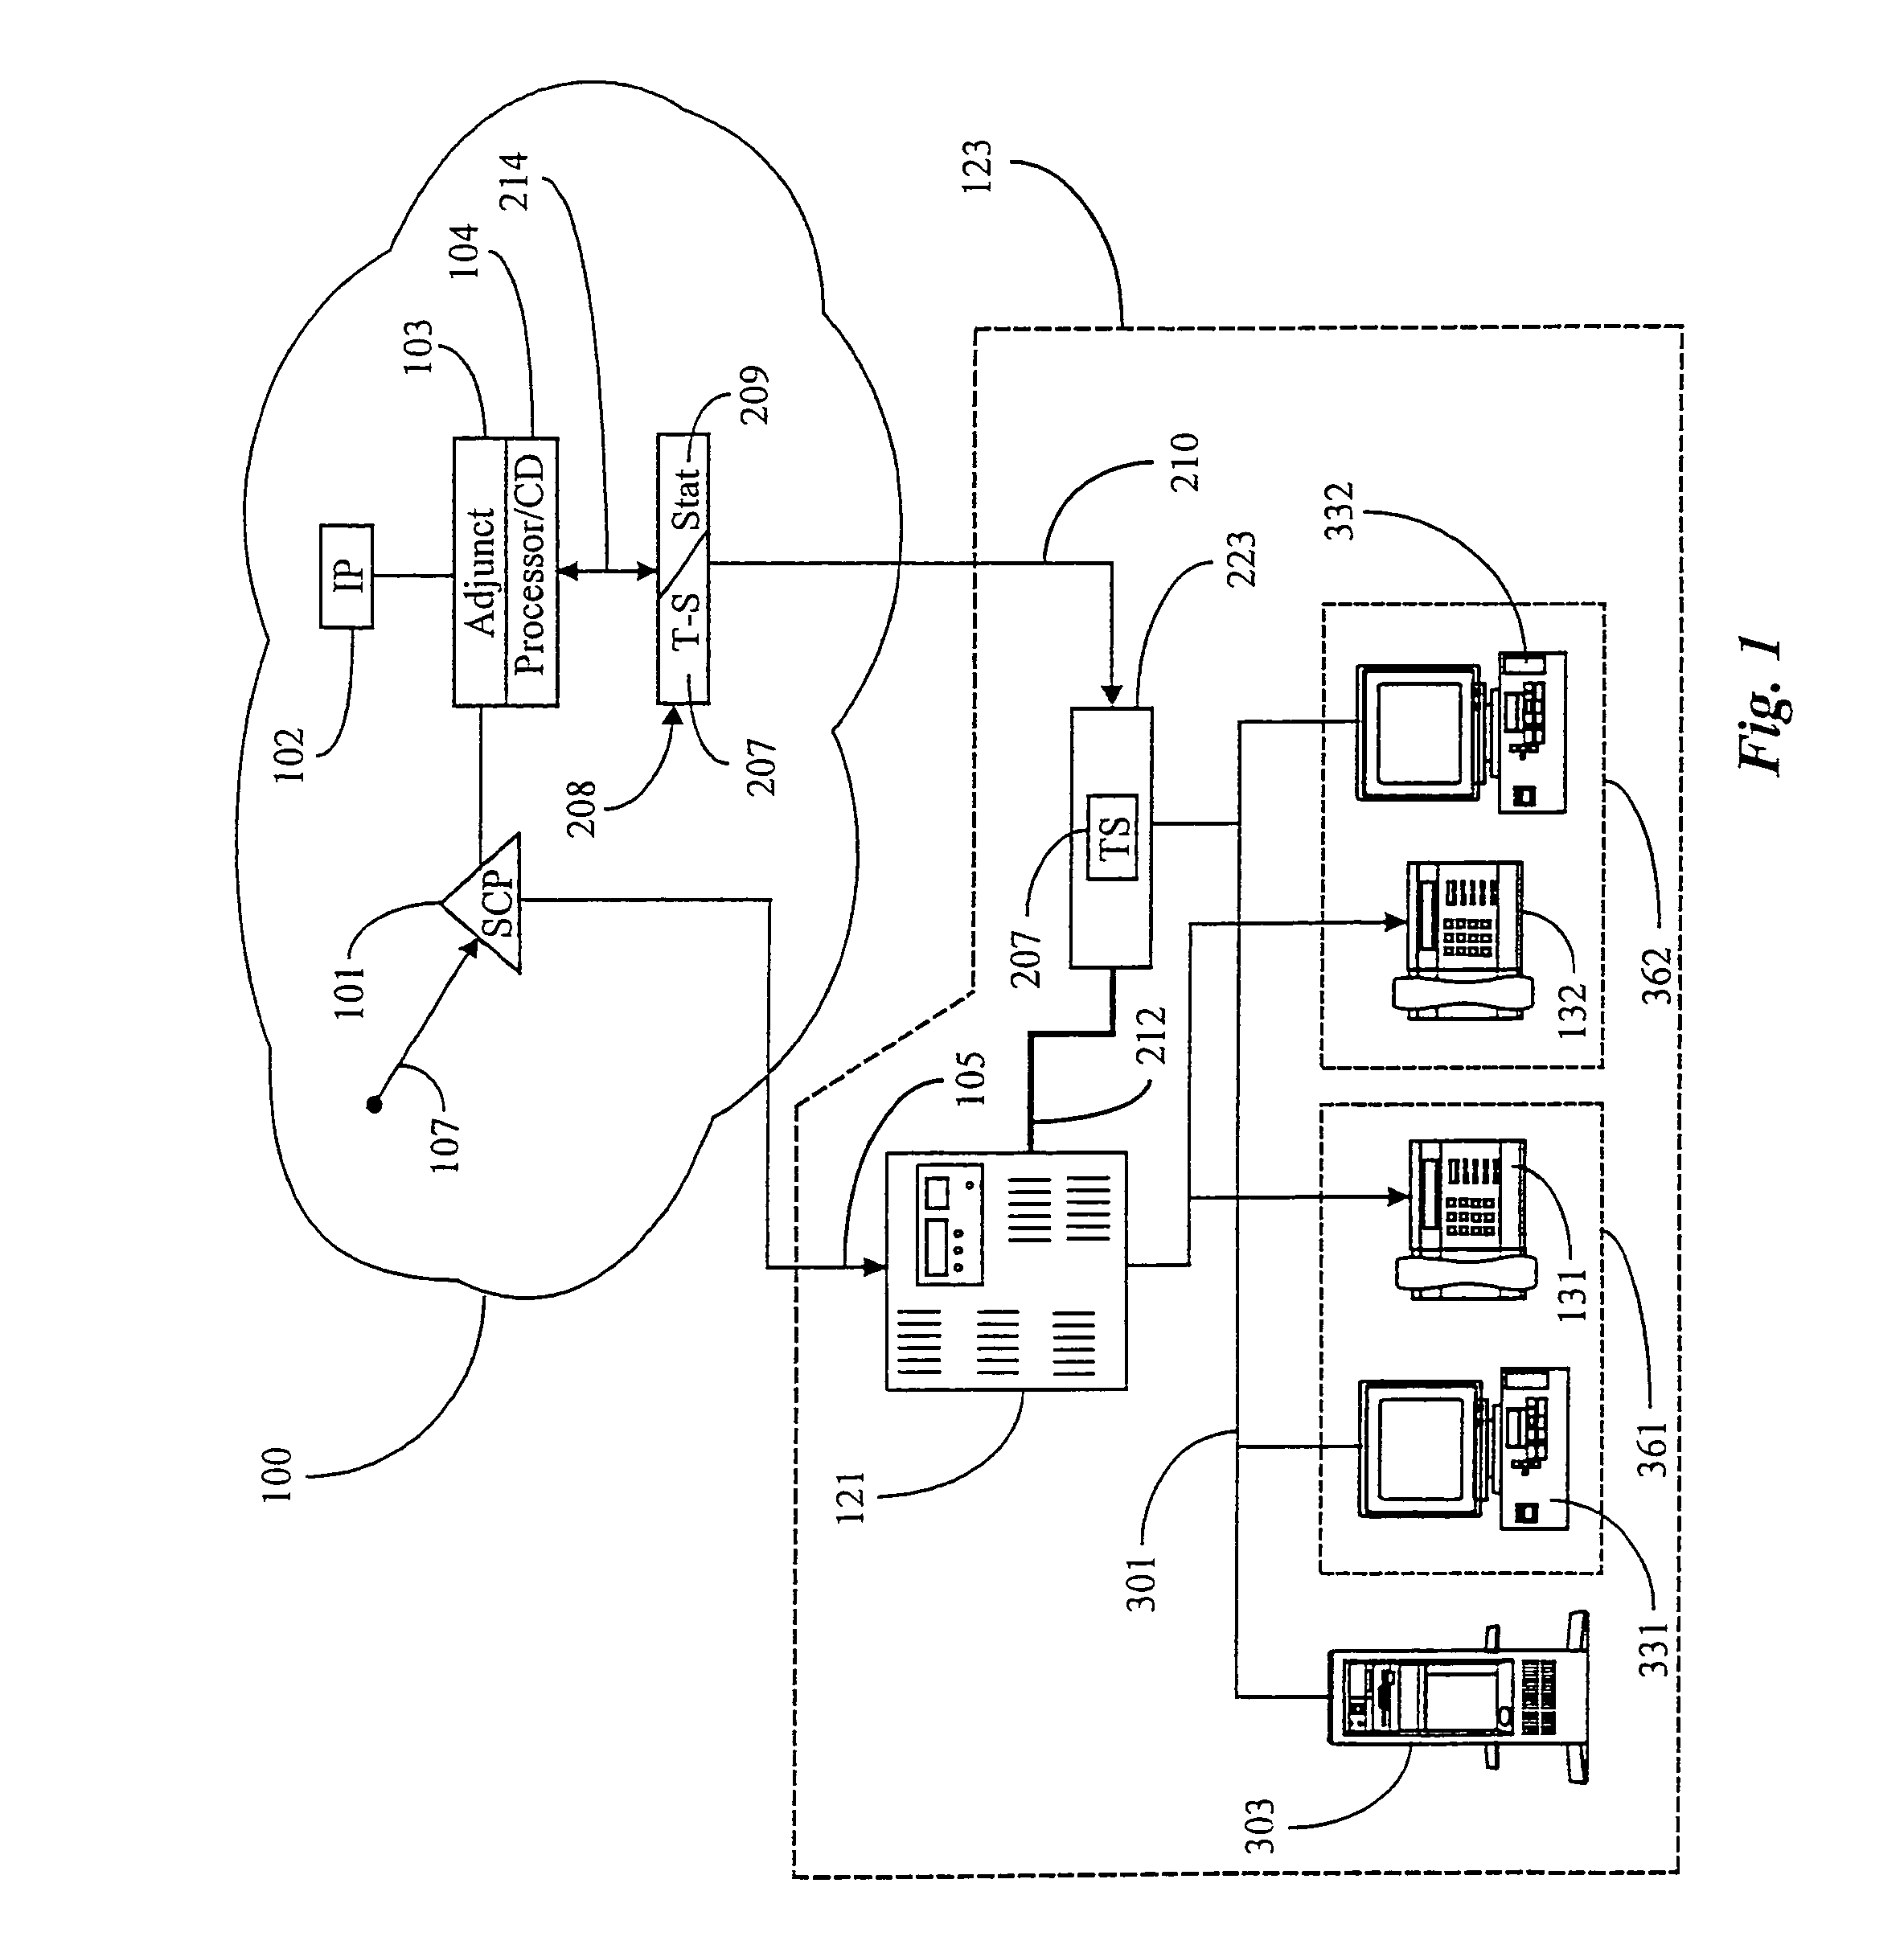 Call and data correspondence in a call-in center employing virtual restructuring for computer telephony integrated functionality